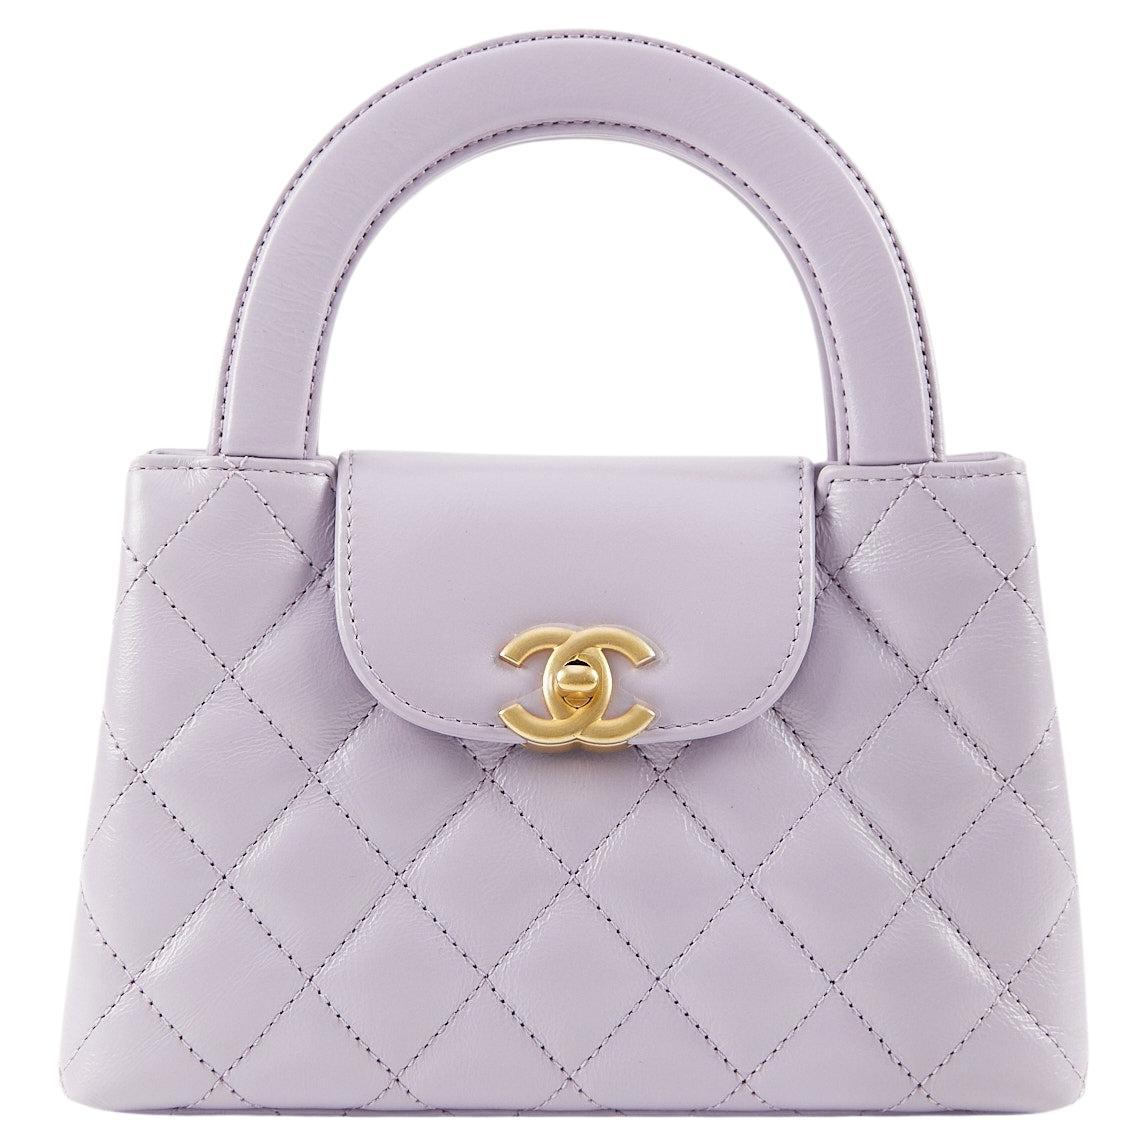 CHANEL SMALL "KELLY" BAG LILAC Aged Calfskin Leather with Gold-Tone Hardware